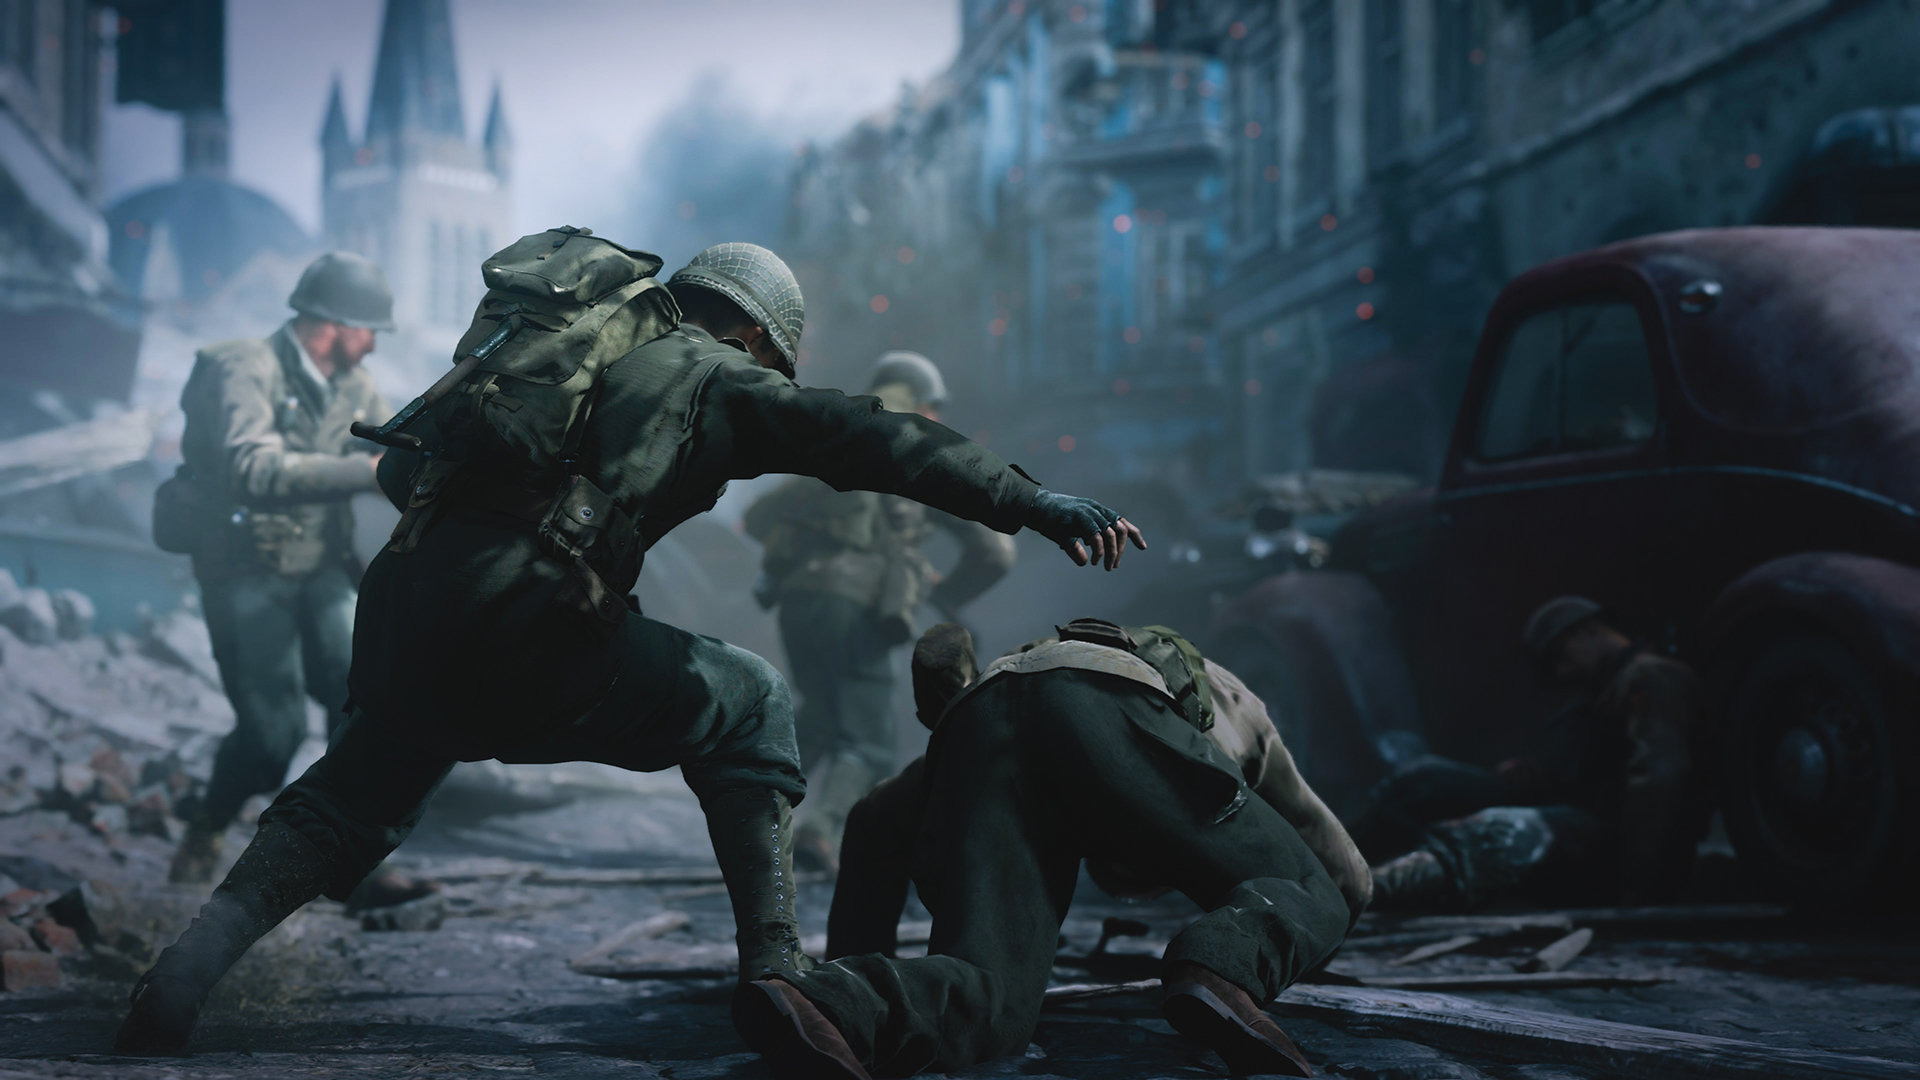 PlayStation on X: Introducing Call of Duty: WWII. Private beta later this  year, pre-order to play it first on PS4:    / X